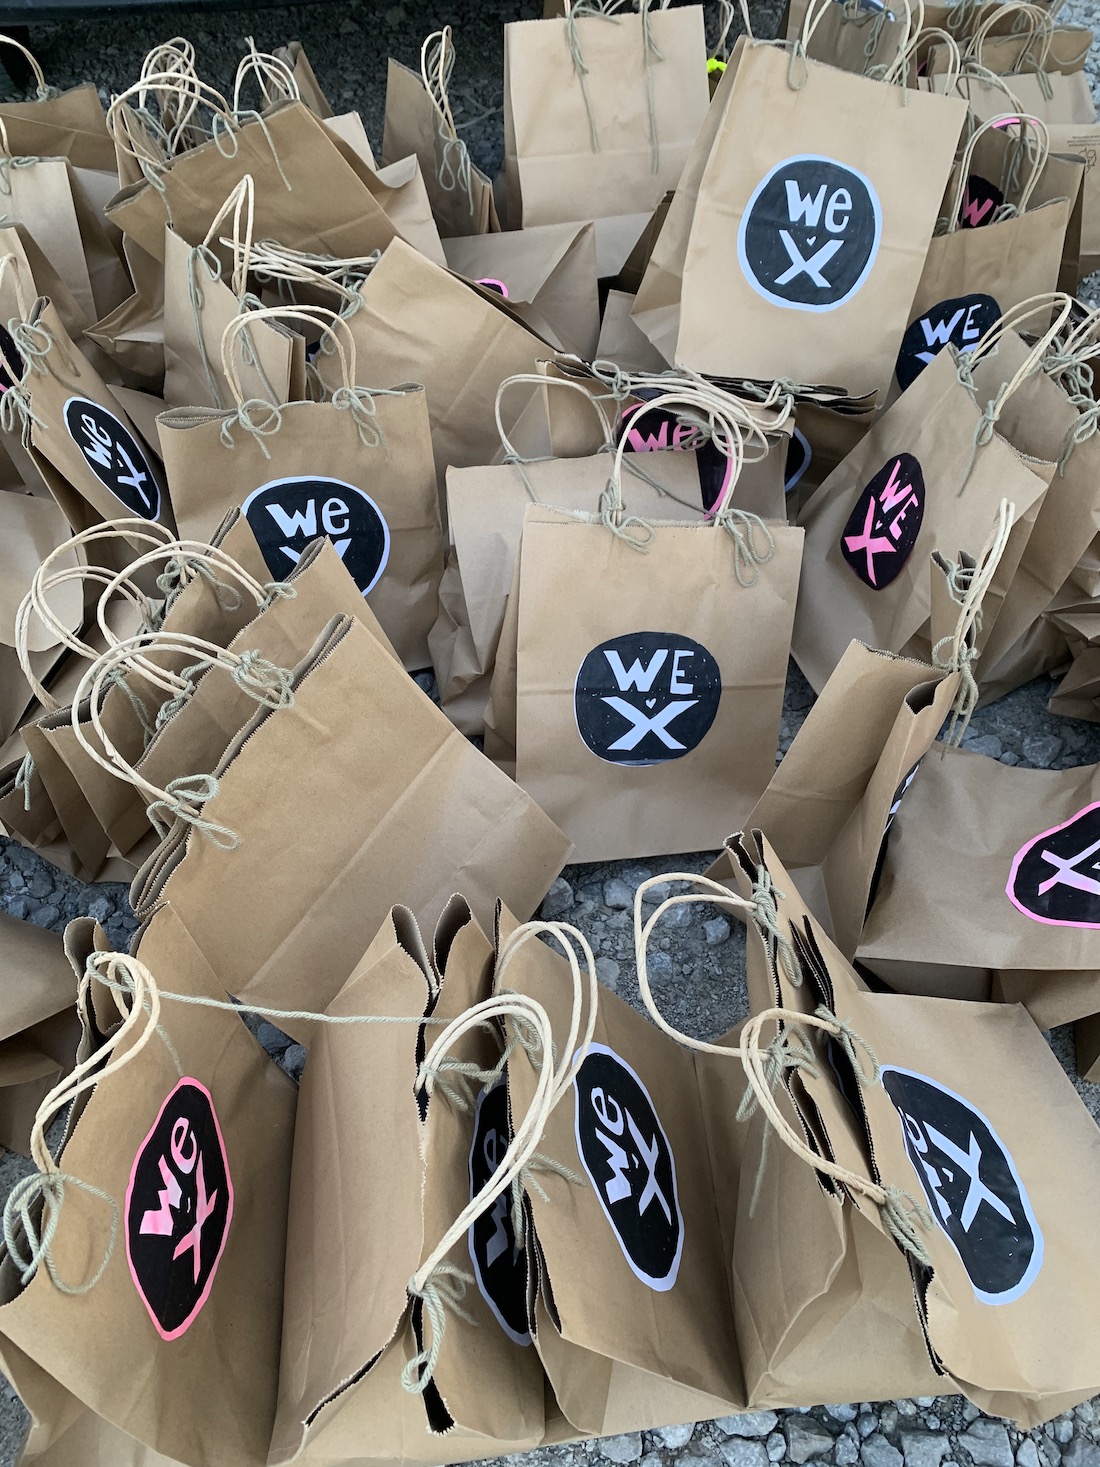 Dozens of brown paper shopping bags with circular Wex stickers